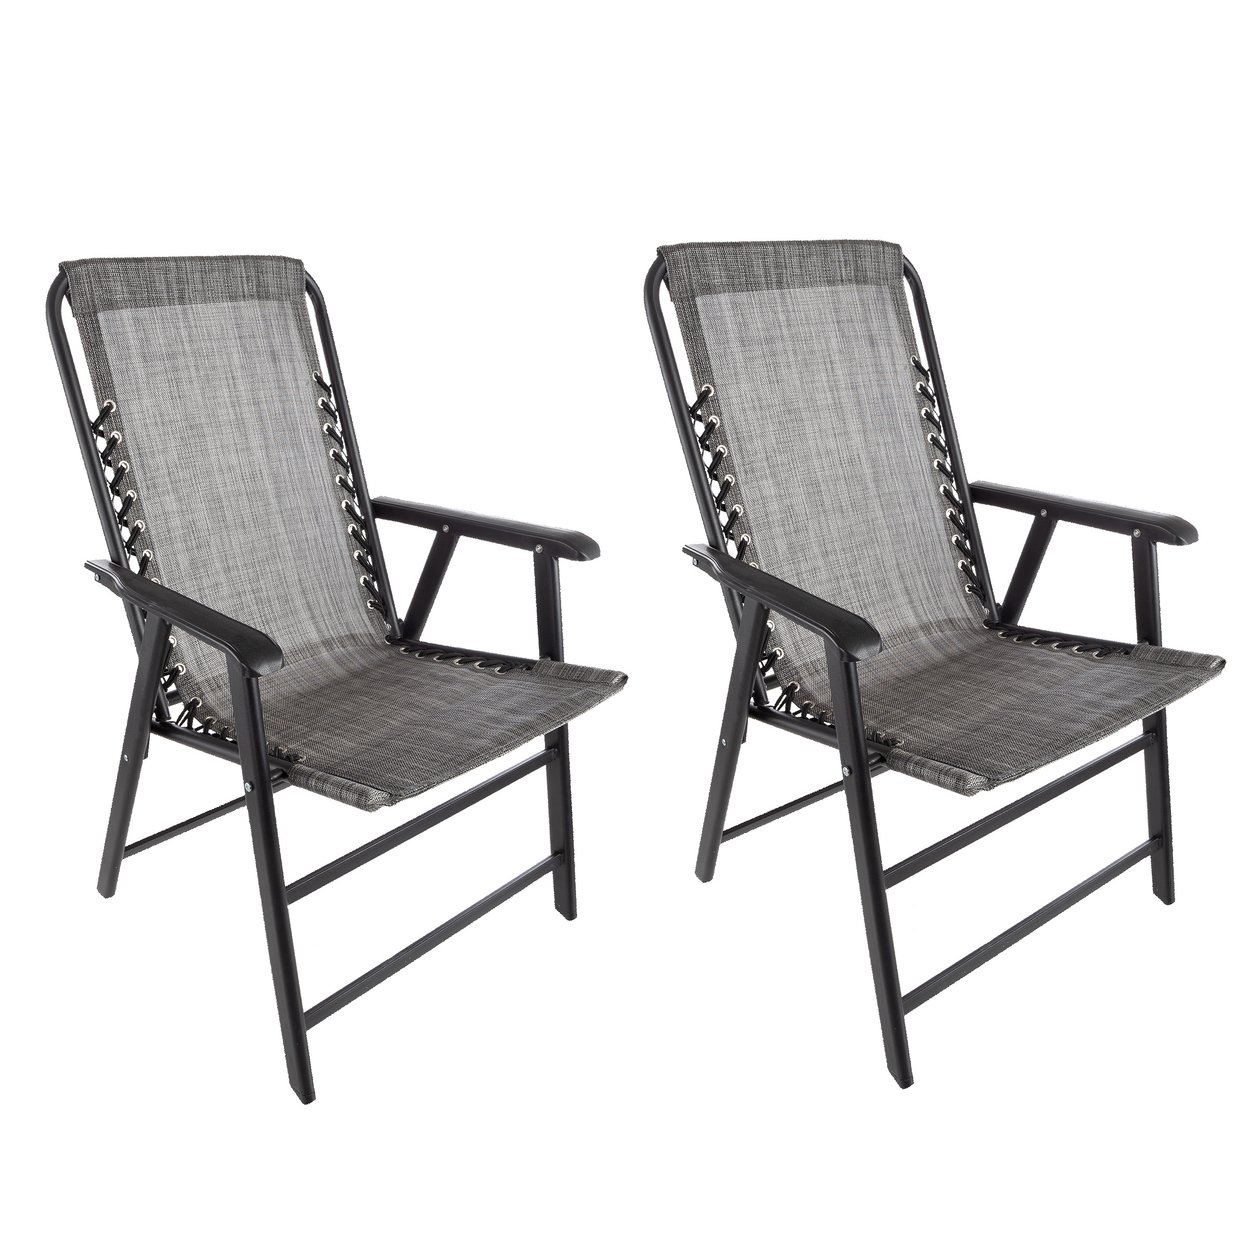 Folding Camping Chairs 2 Set Lawn Chairs Portable Lounge Chairs, Gray